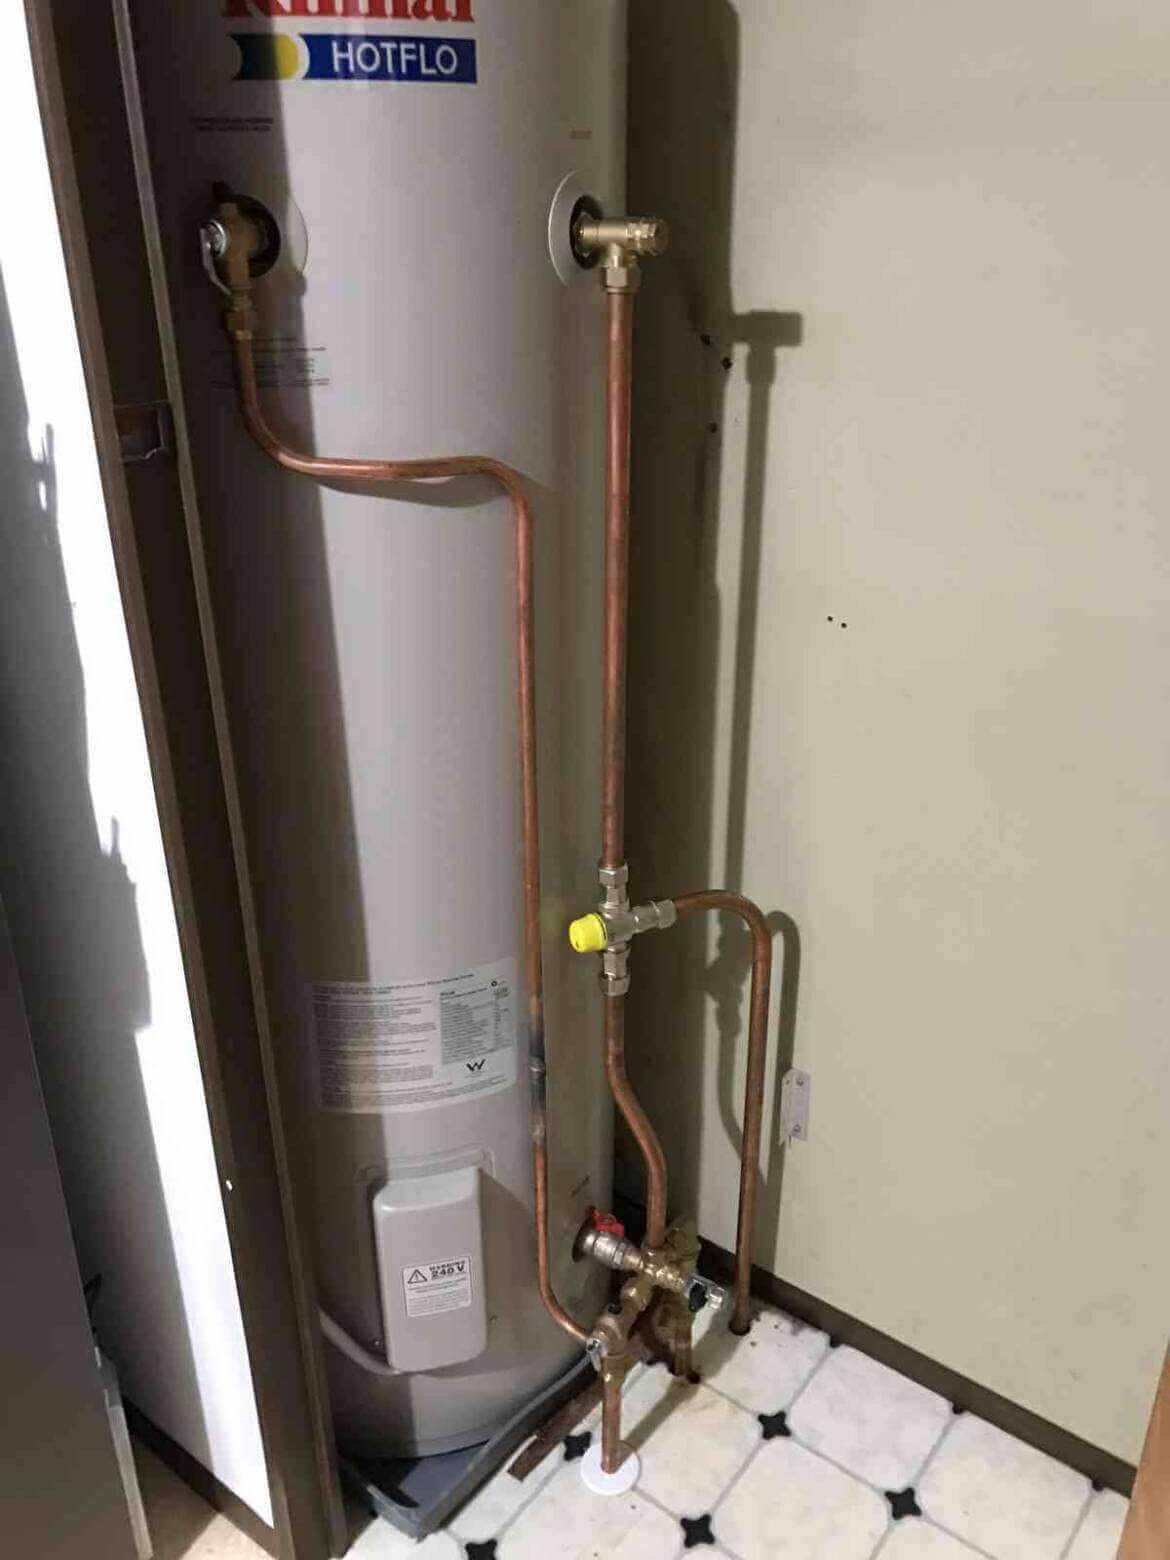 Hot Water More Efficient